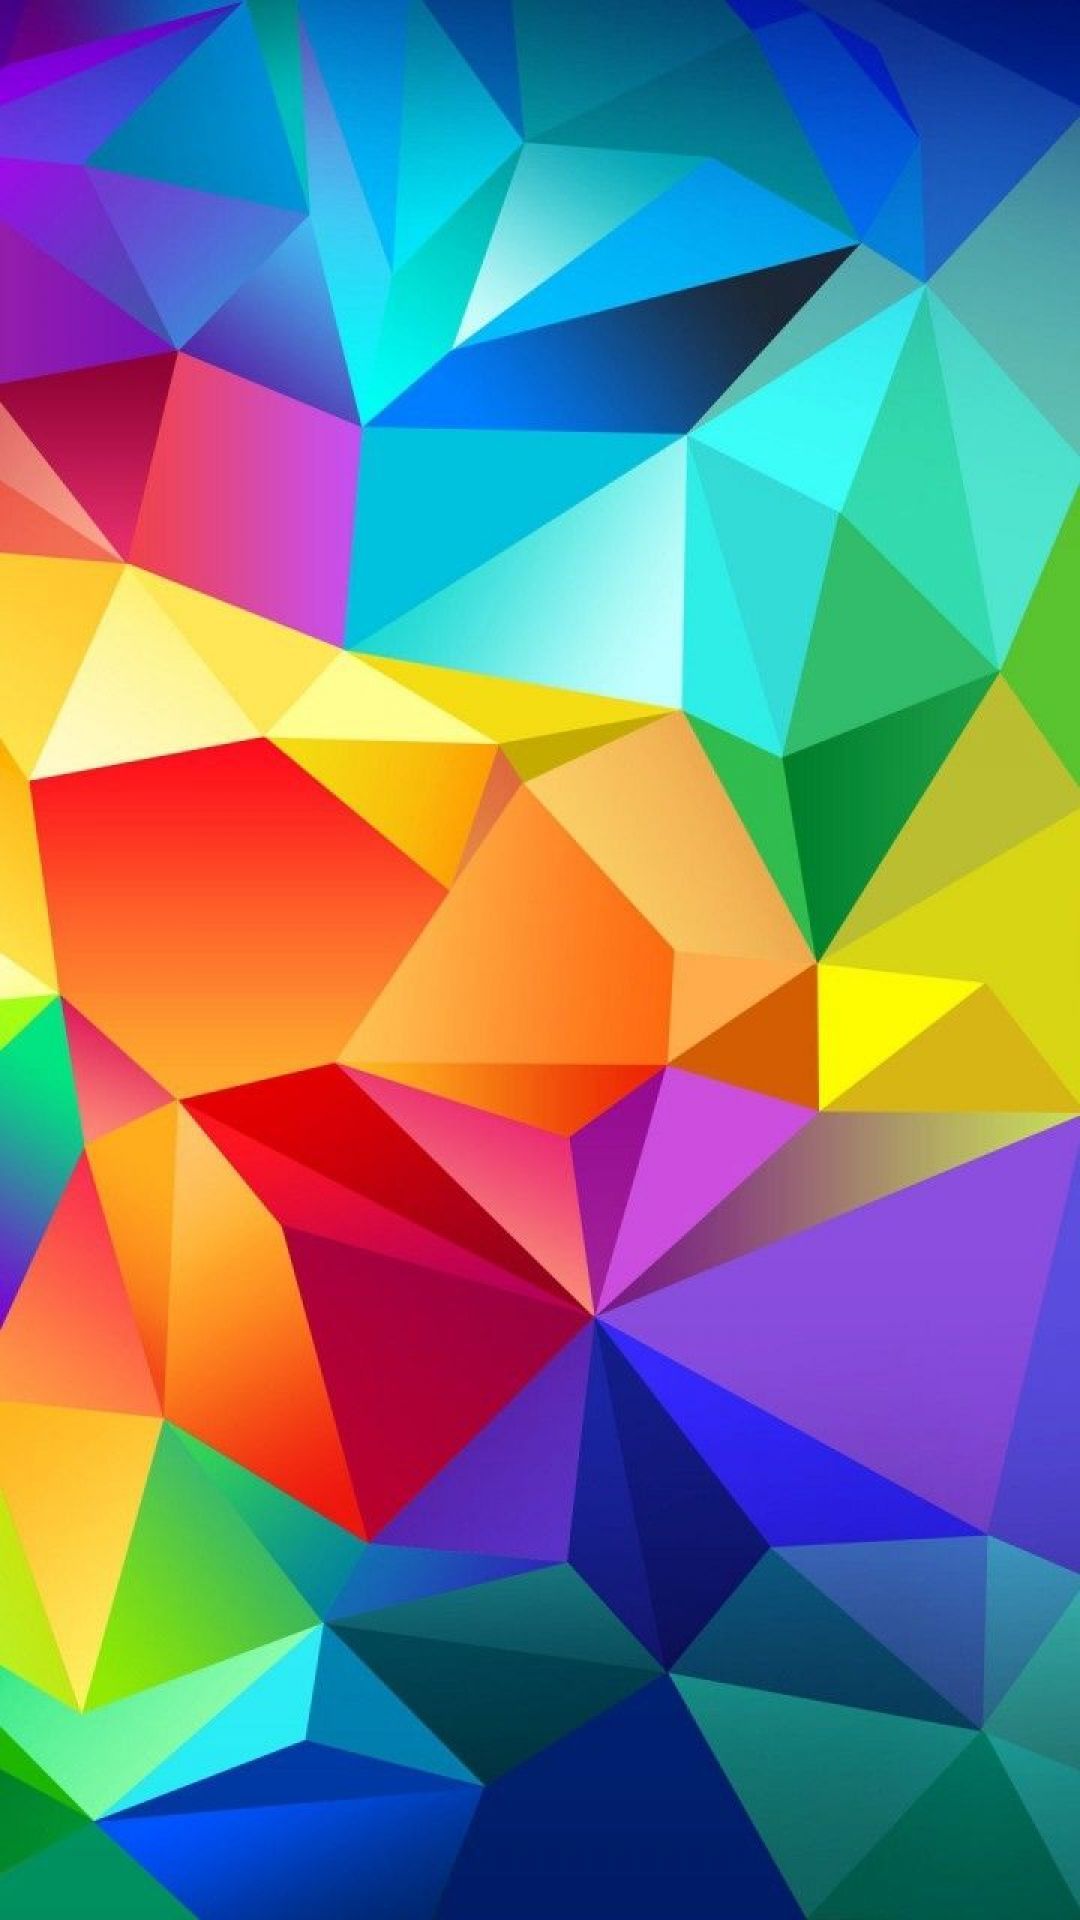 Geometric Shapes Wallpapers - Wallpaper Cave